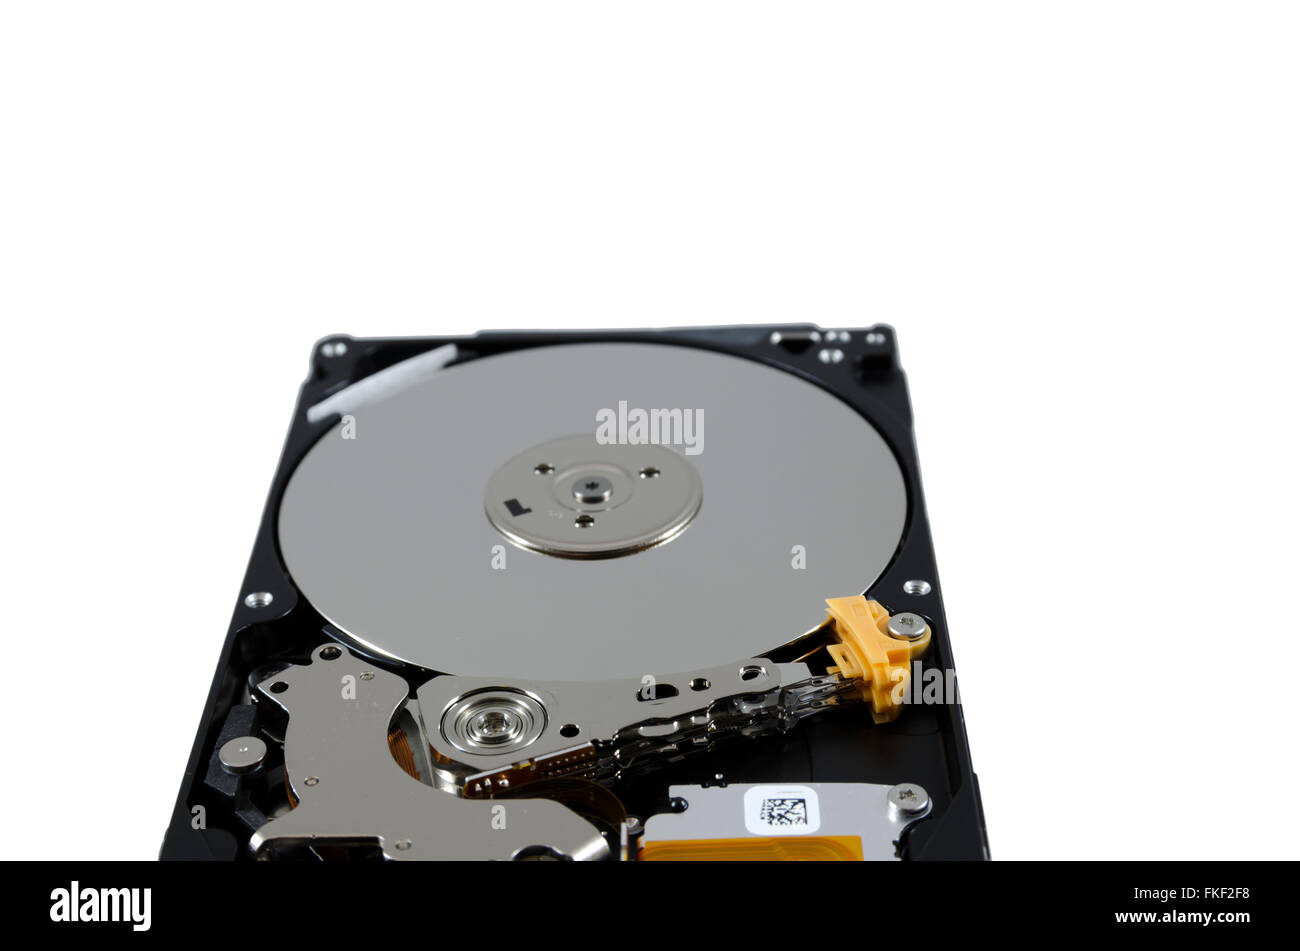 Picture of a hard disk without cover showing the read and write mechanism. Stock Photo